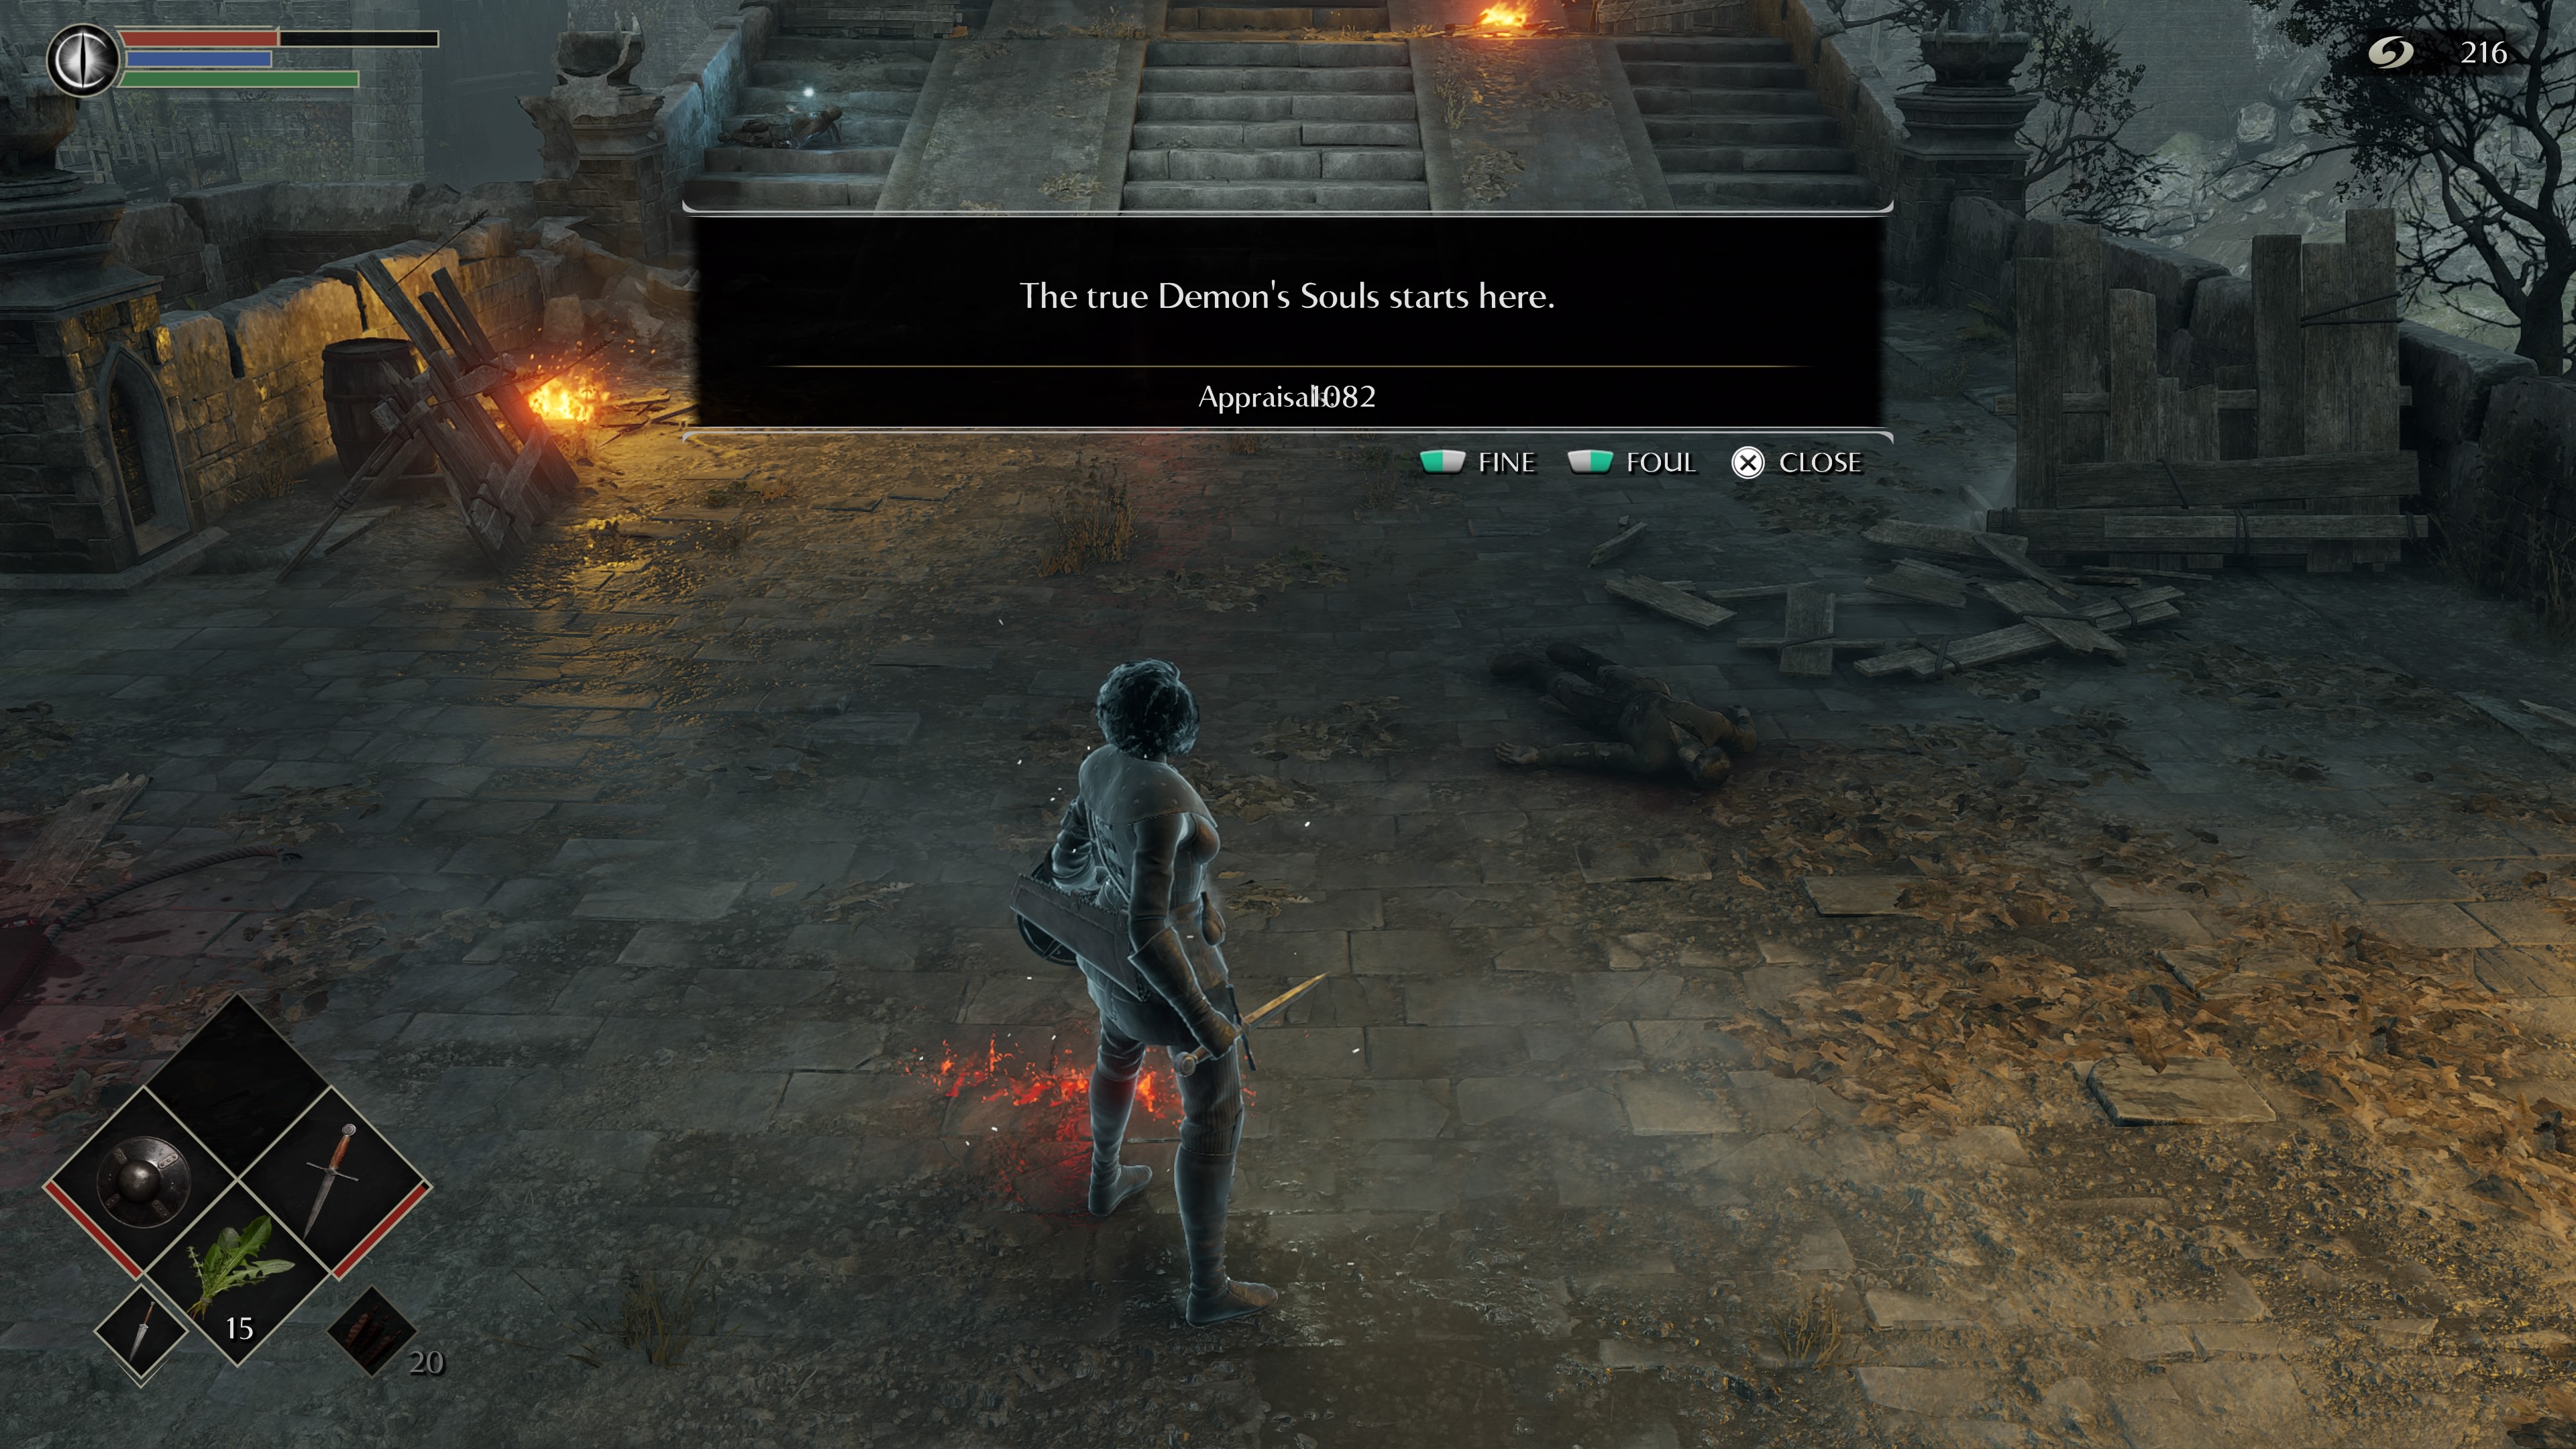 A screenshot from Demon's Souls, there is a pop up saying "Thee true Demon's Souls starts here."